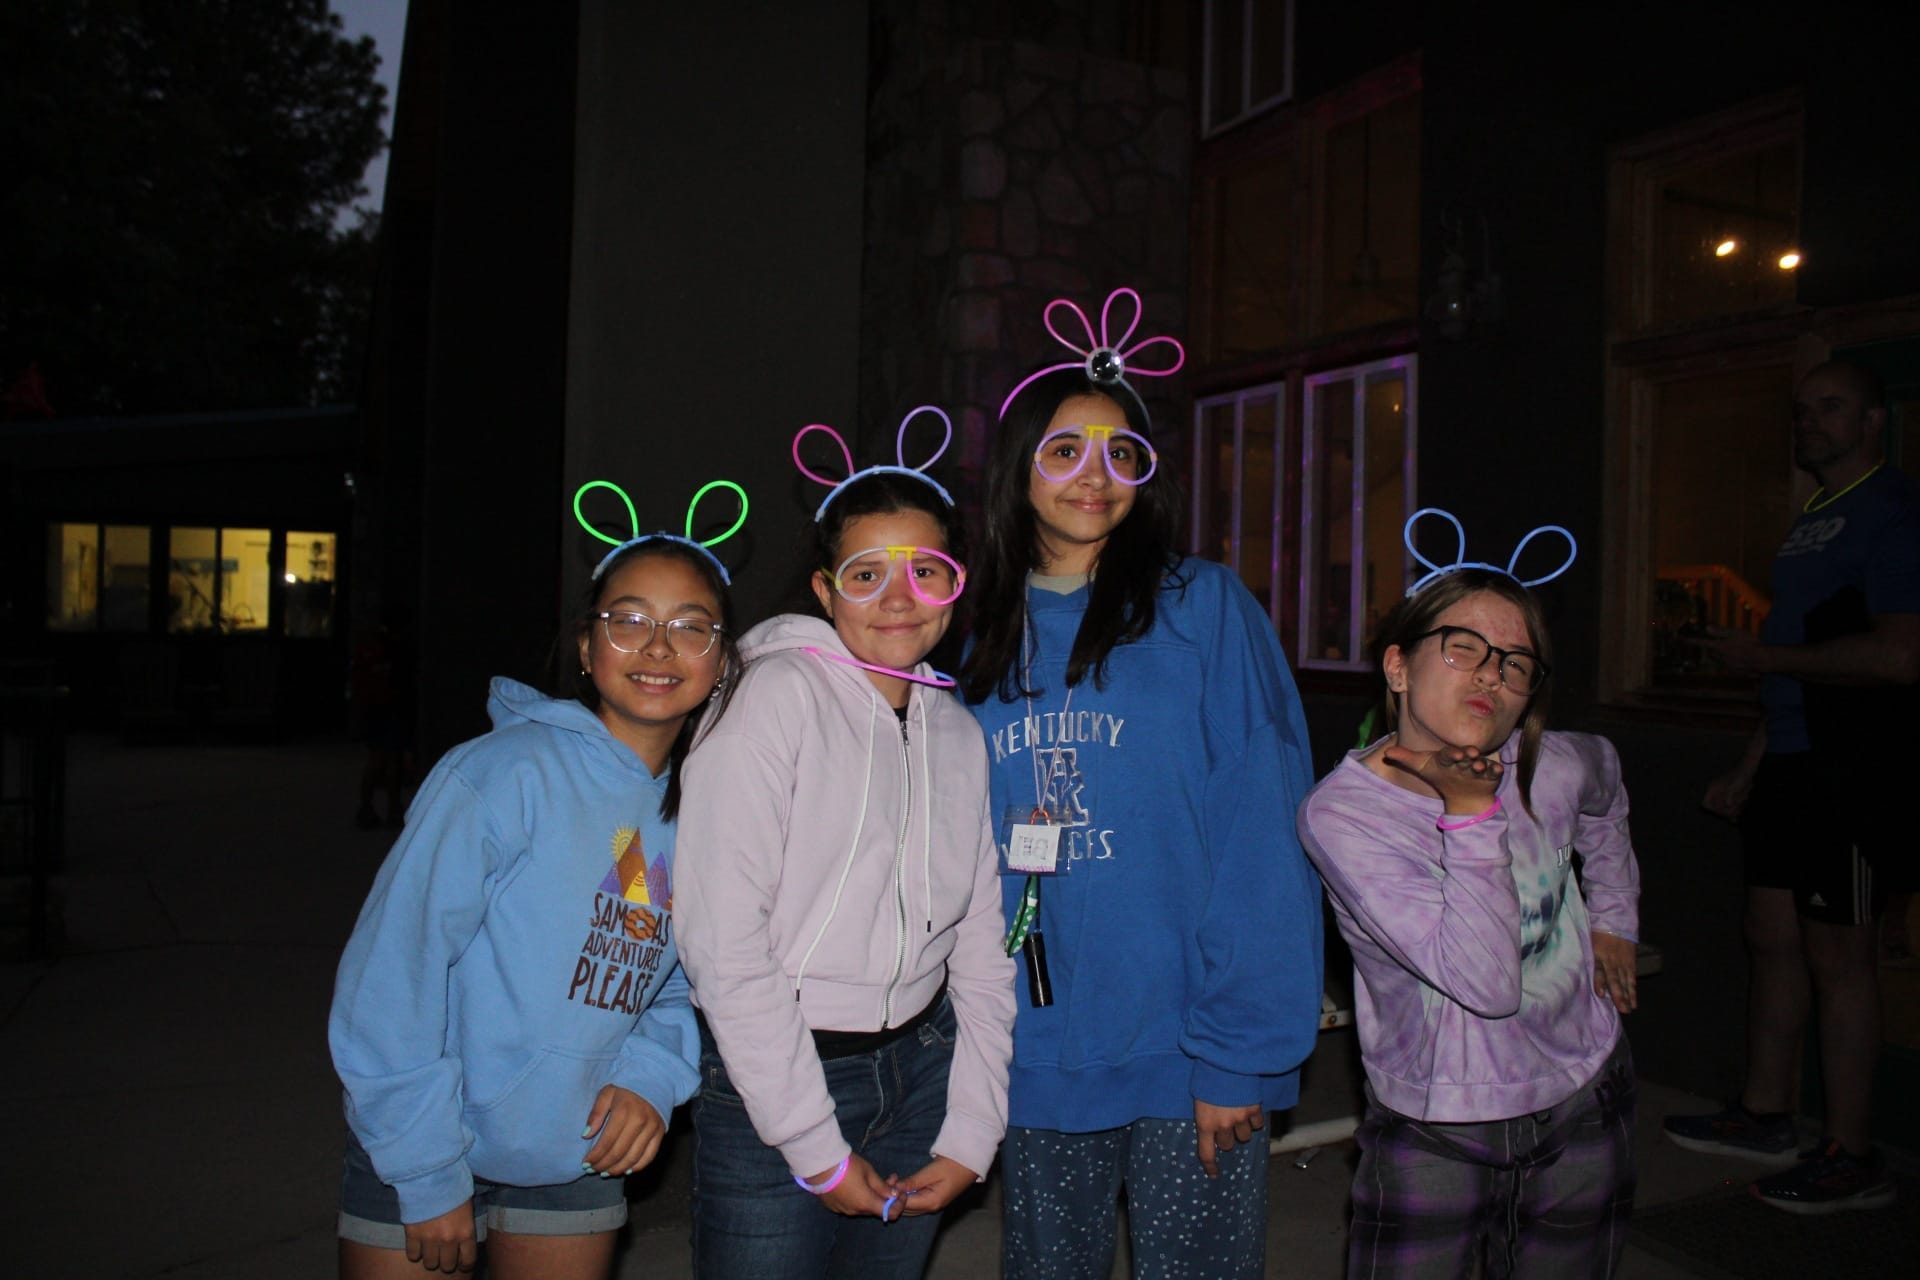 girl scouts at camp having fun with glow sticks